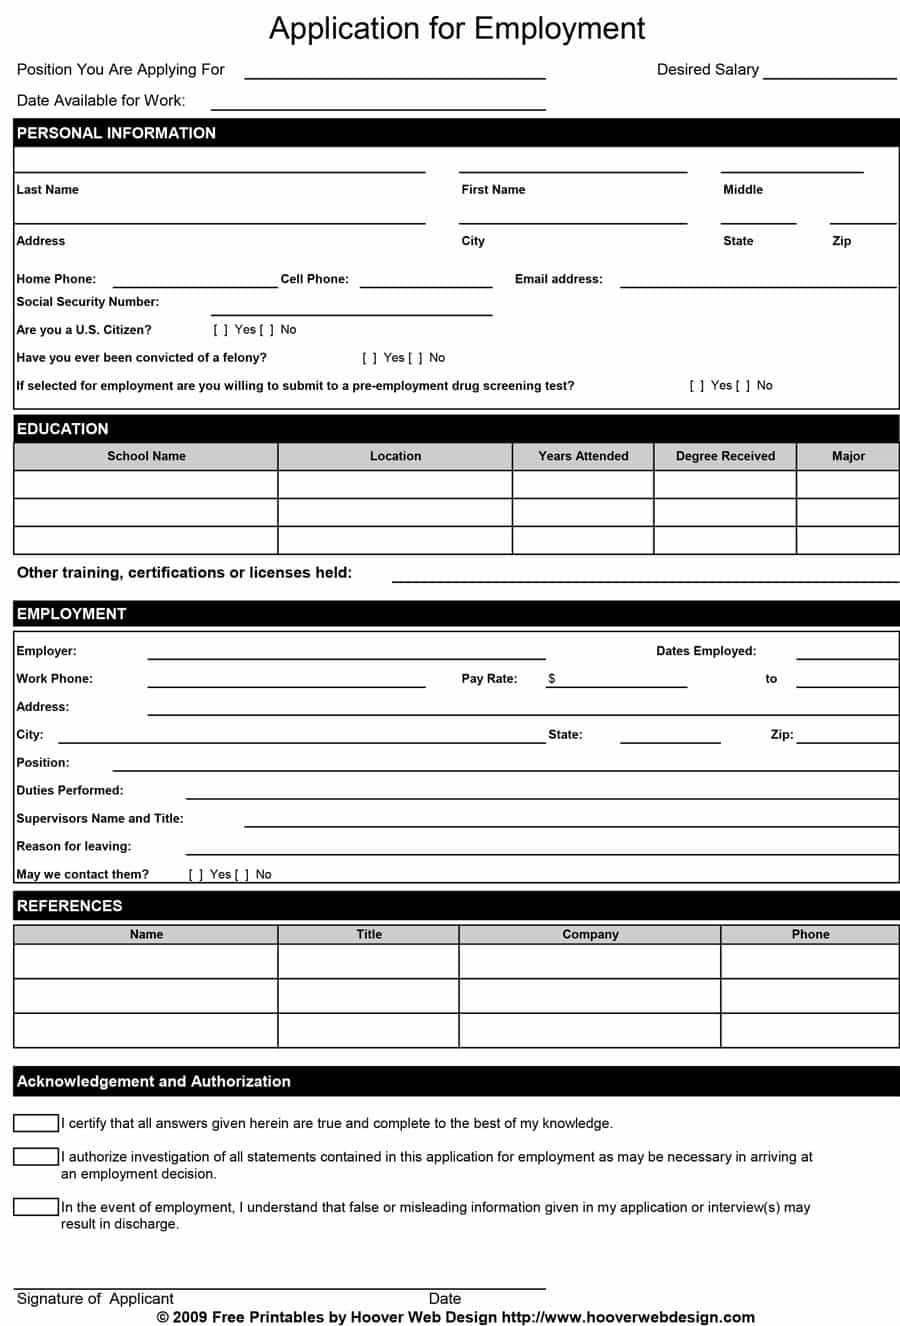 Employment Application Forms Free - Tomope.zaribanks.co Intended For Employment Application Template Microsoft Word